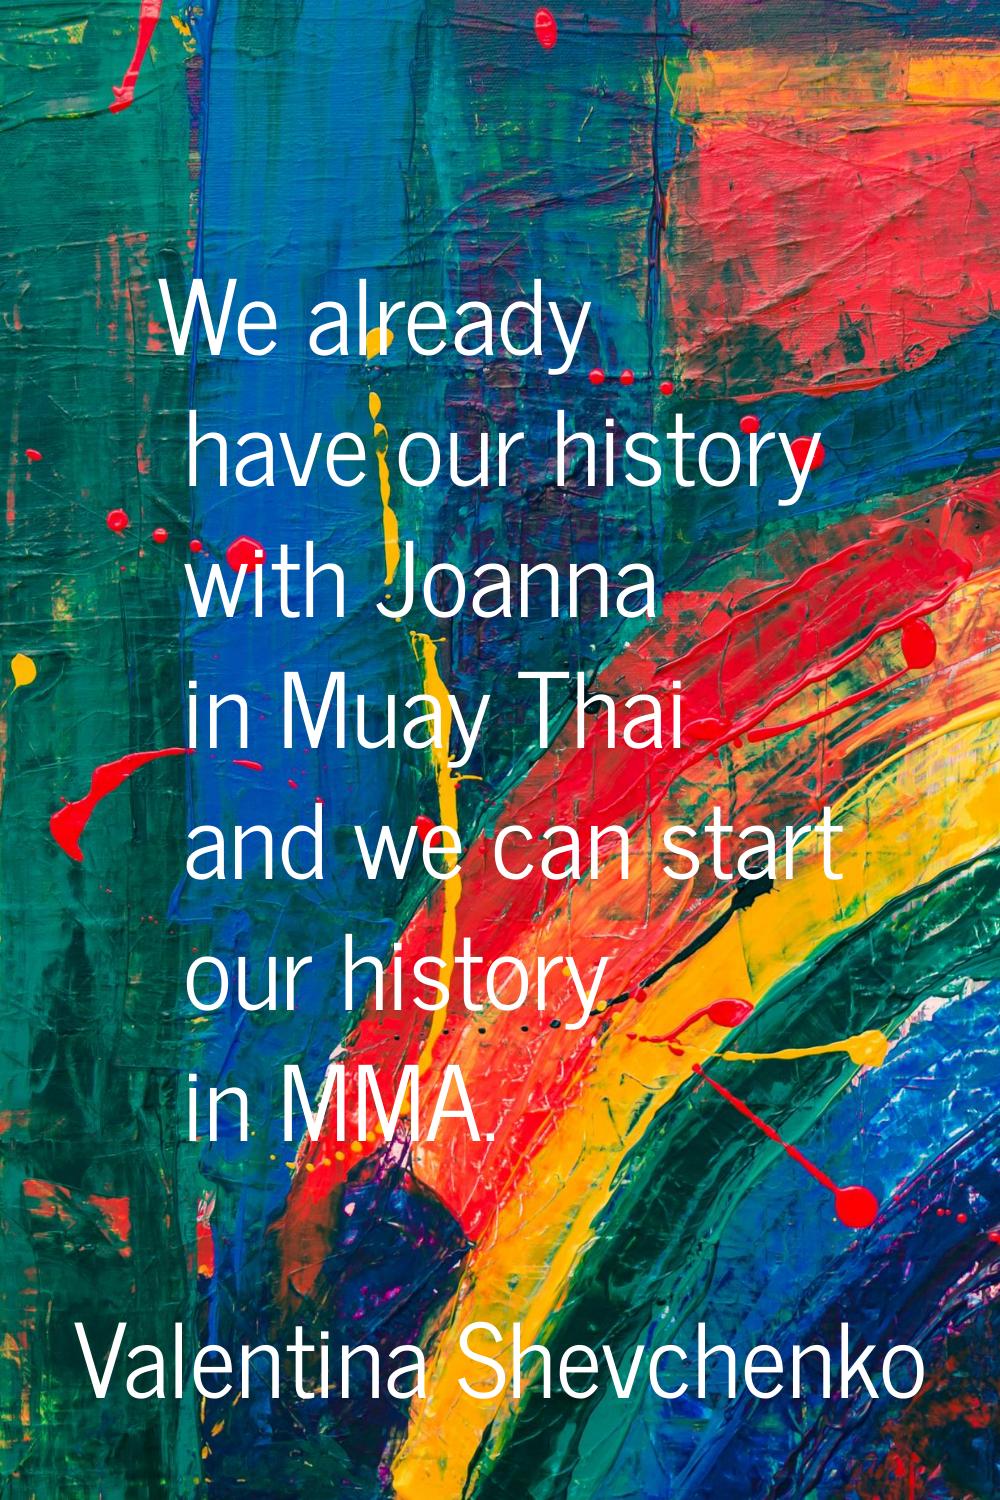 We already have our history with Joanna in Muay Thai and we can start our history in MMA.